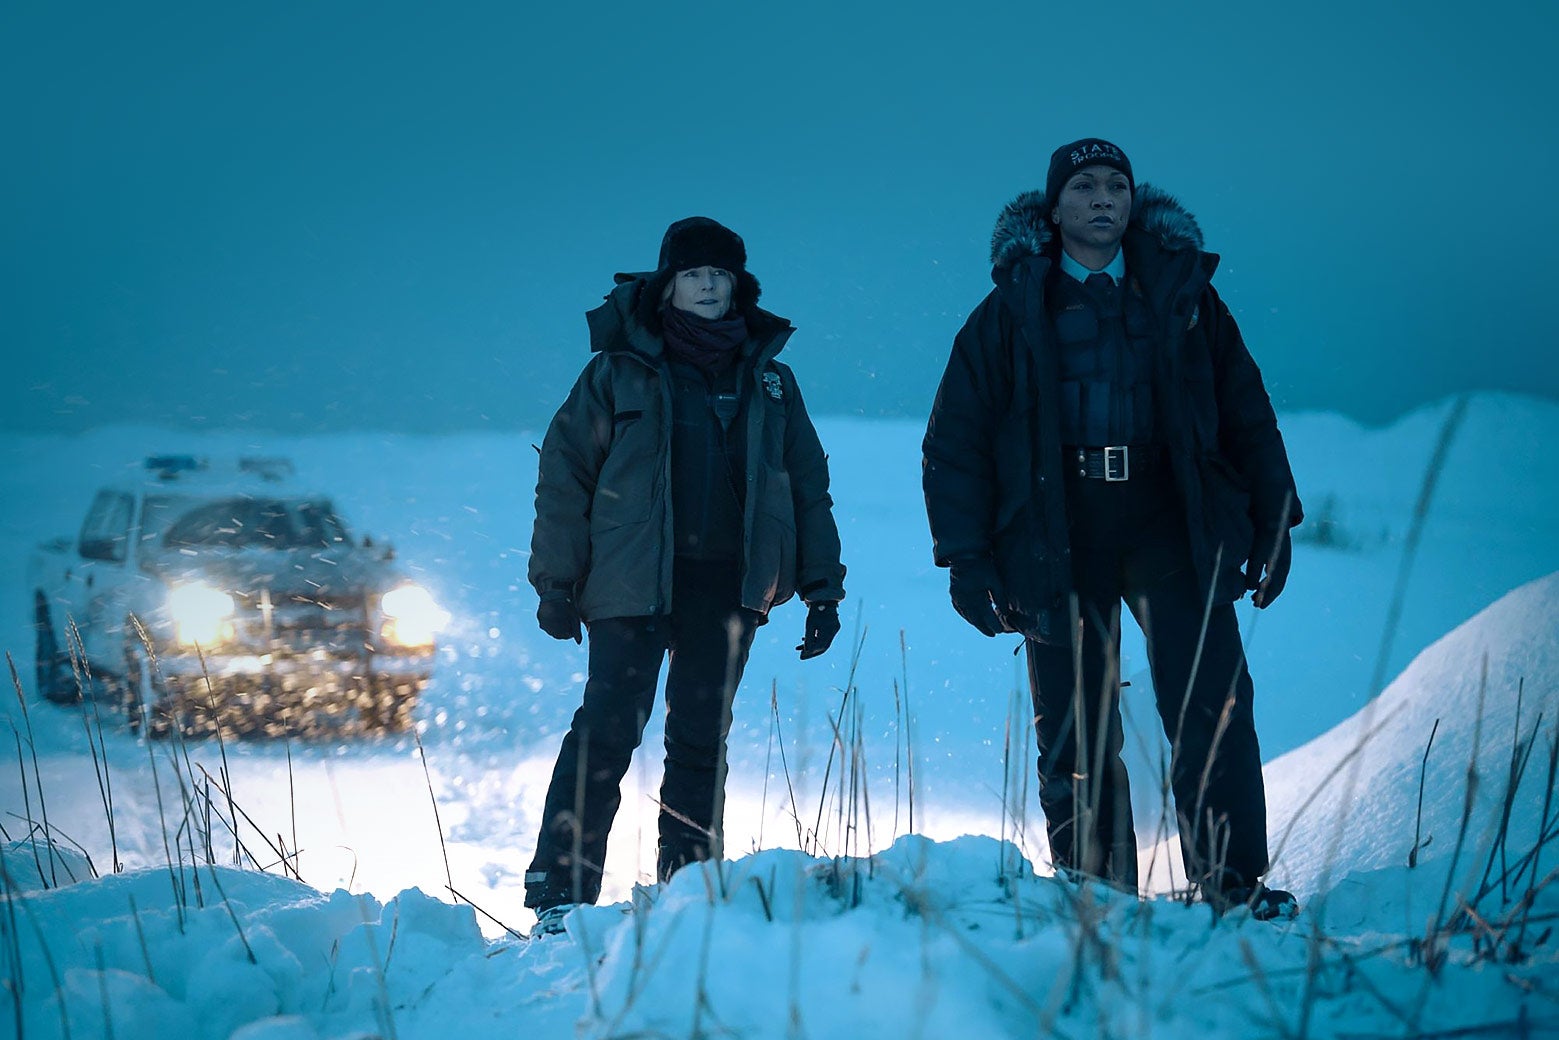 Two female detectives, wearing parkas, stand in the snowy, wintry darkness, with the lights of a police car shining behind them.